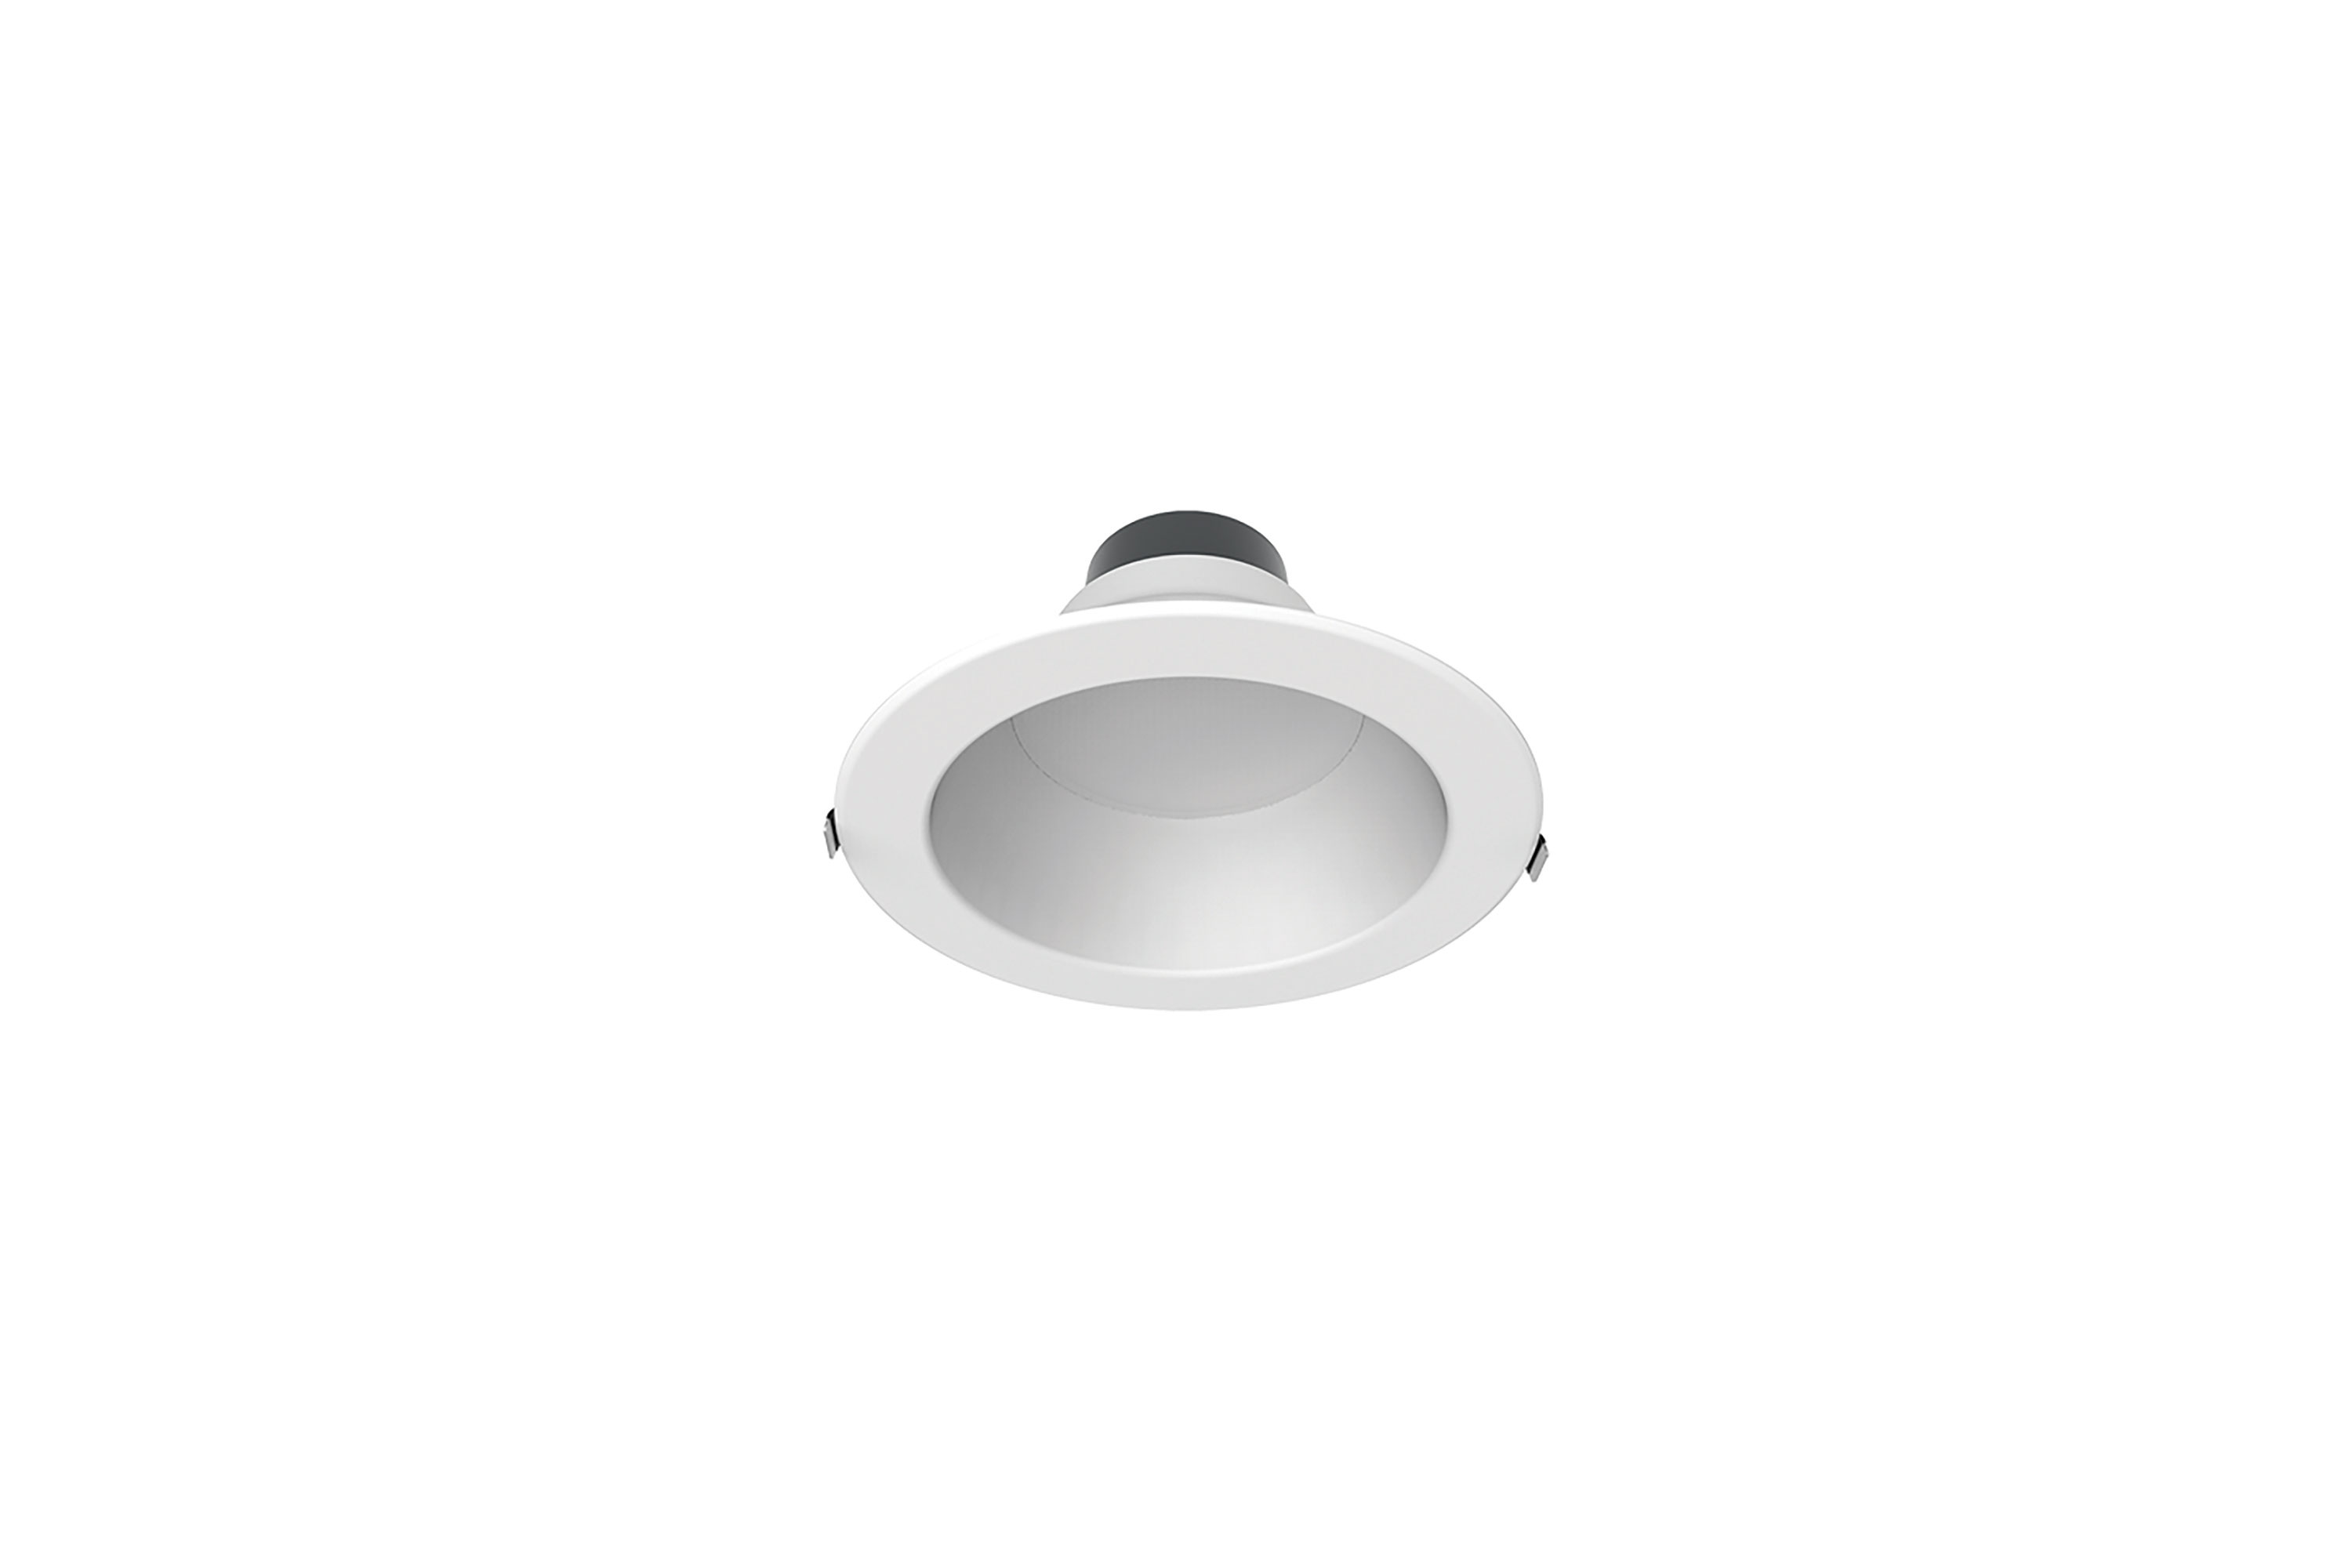 White downlight. Image by EarthTronics.